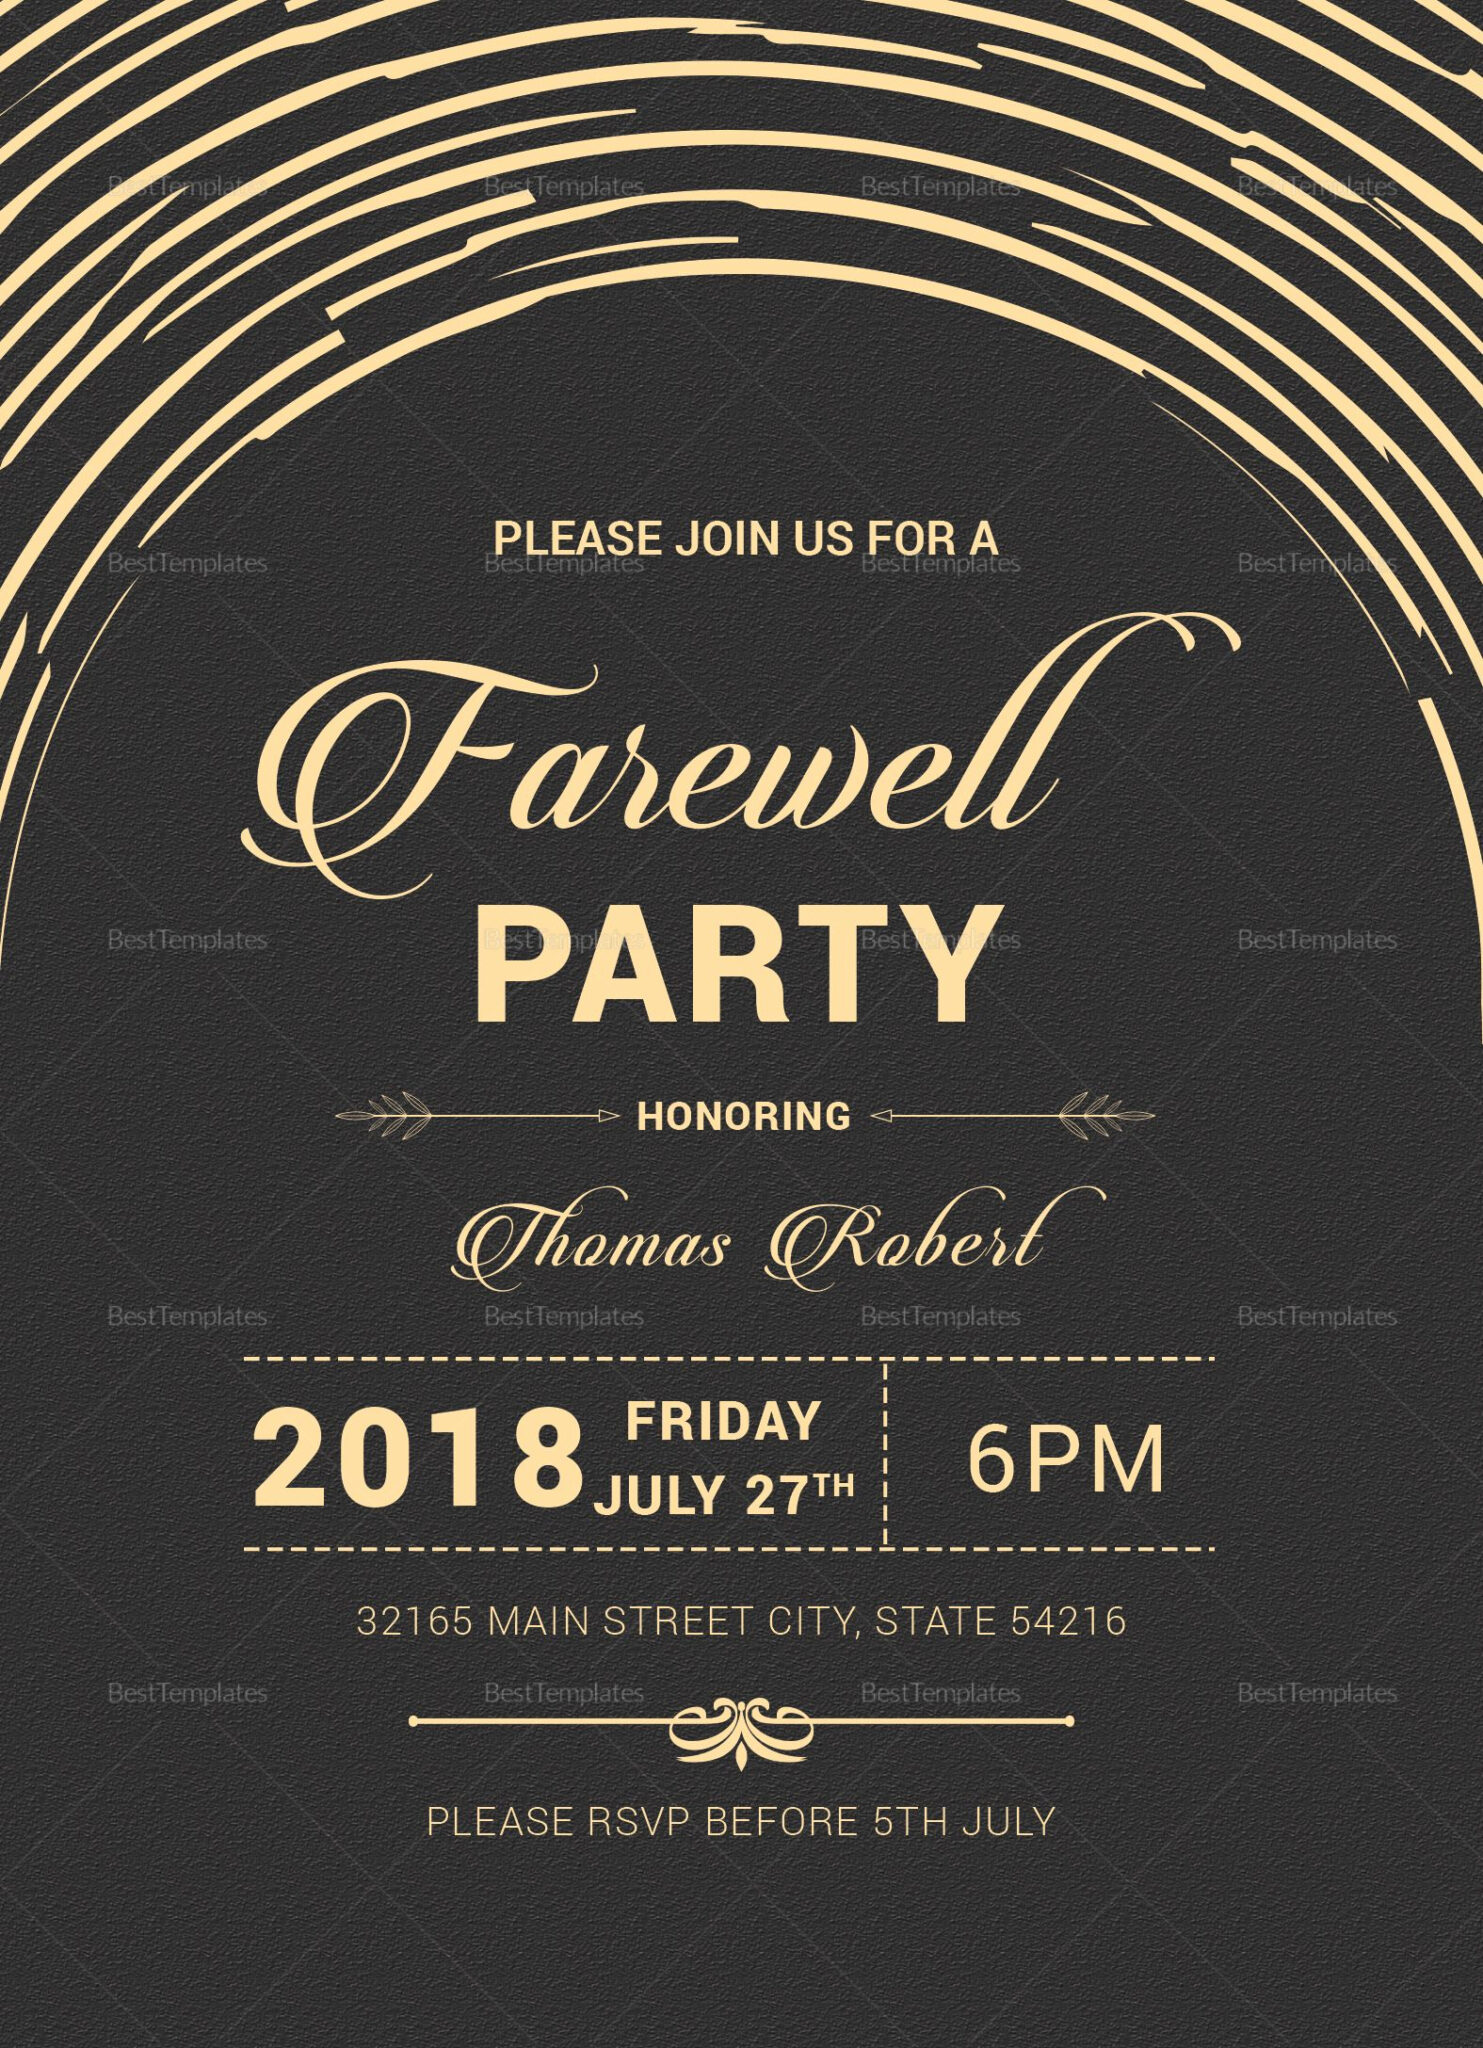 Farewell Party Template Free Printable Templates